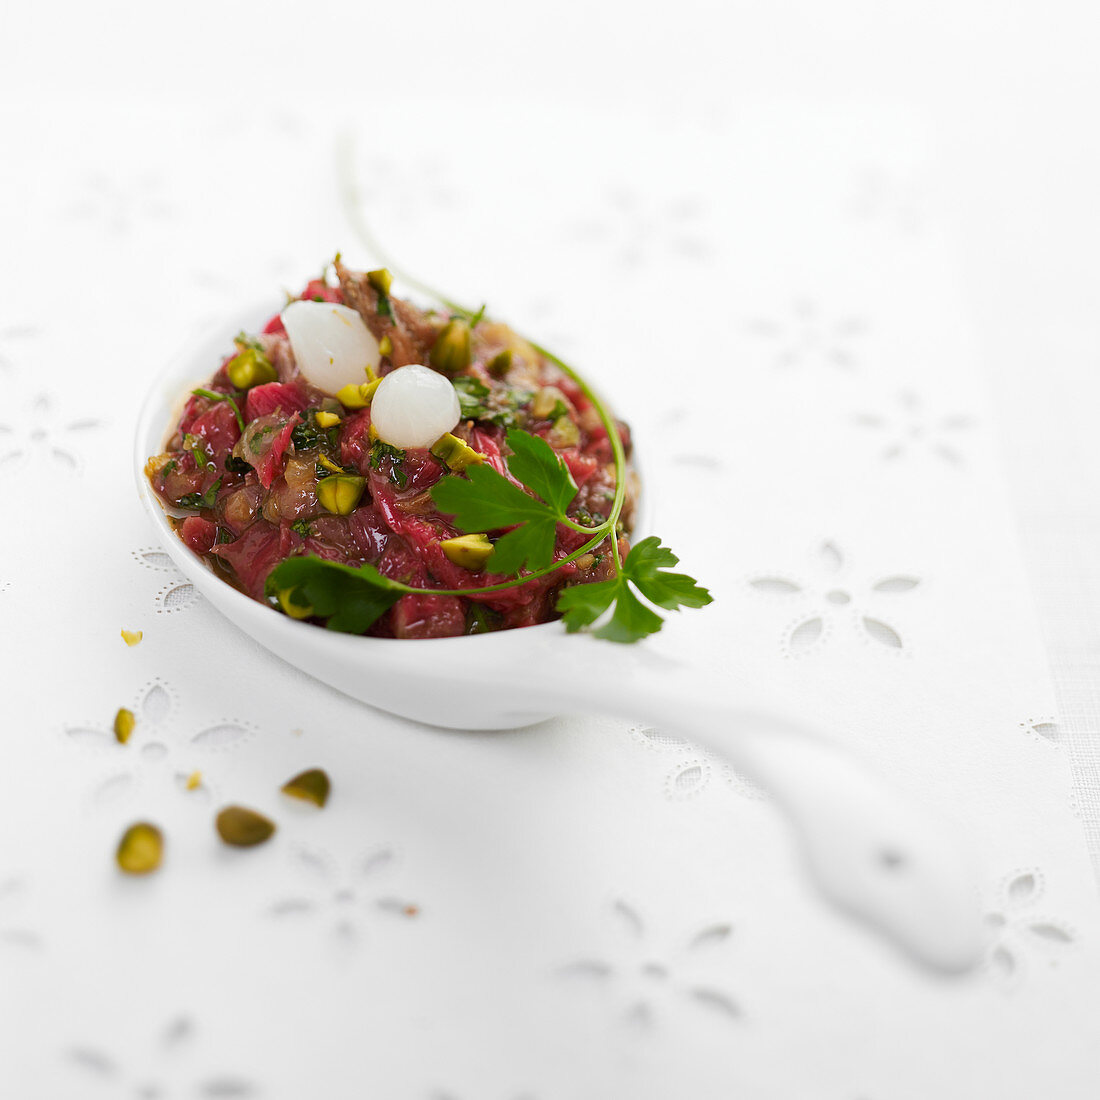 Beef tartare with pistachios